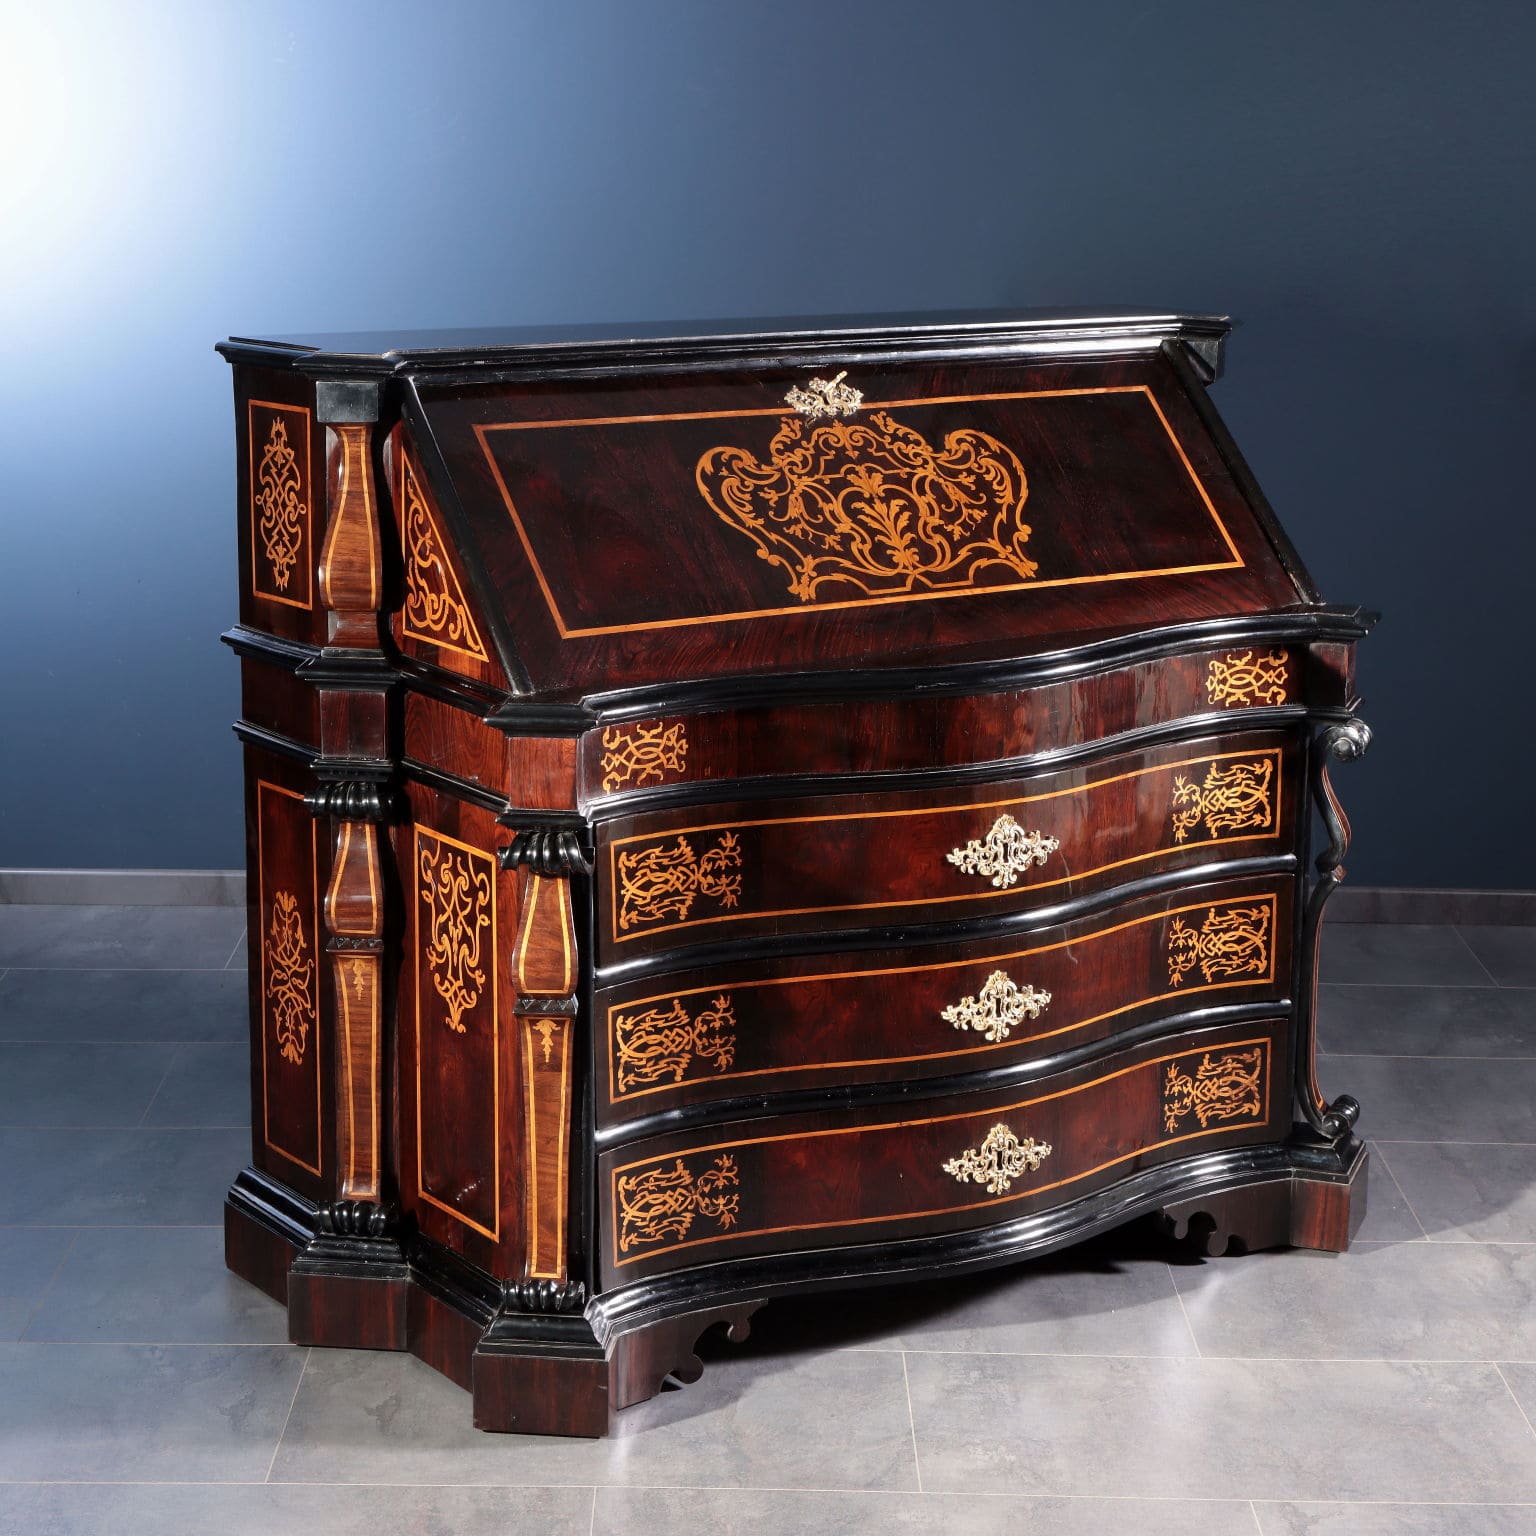 Drop-leaf chest of drawers, Rome, second quarter of the 18th century